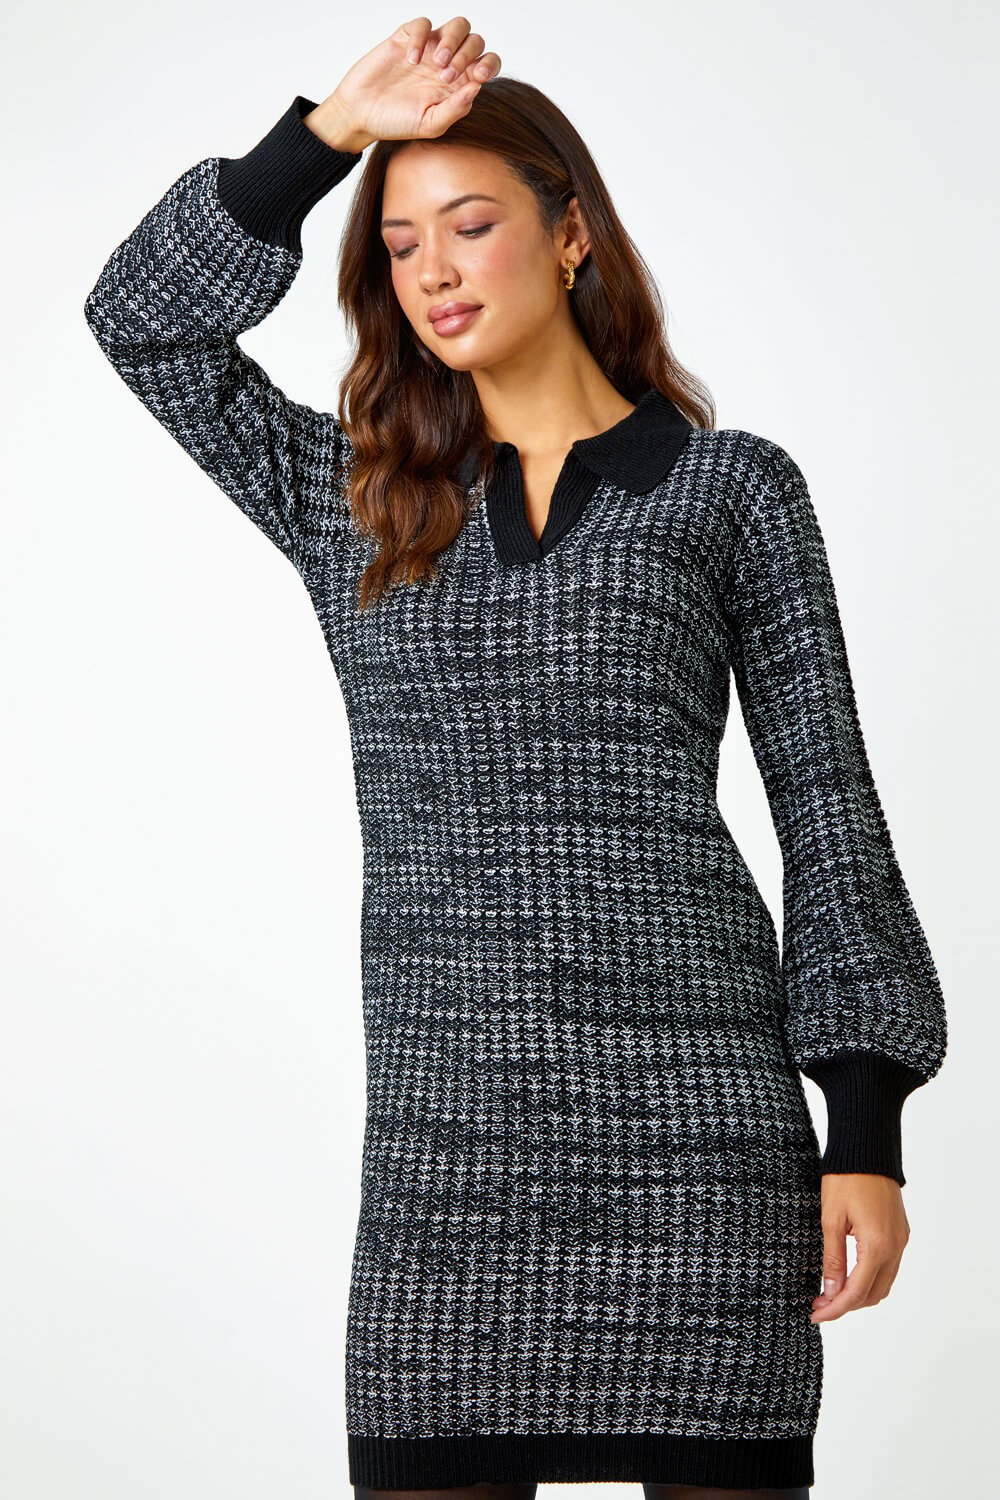 Charcoal Collared Knitted Jumper Dress, Image 2 of 5